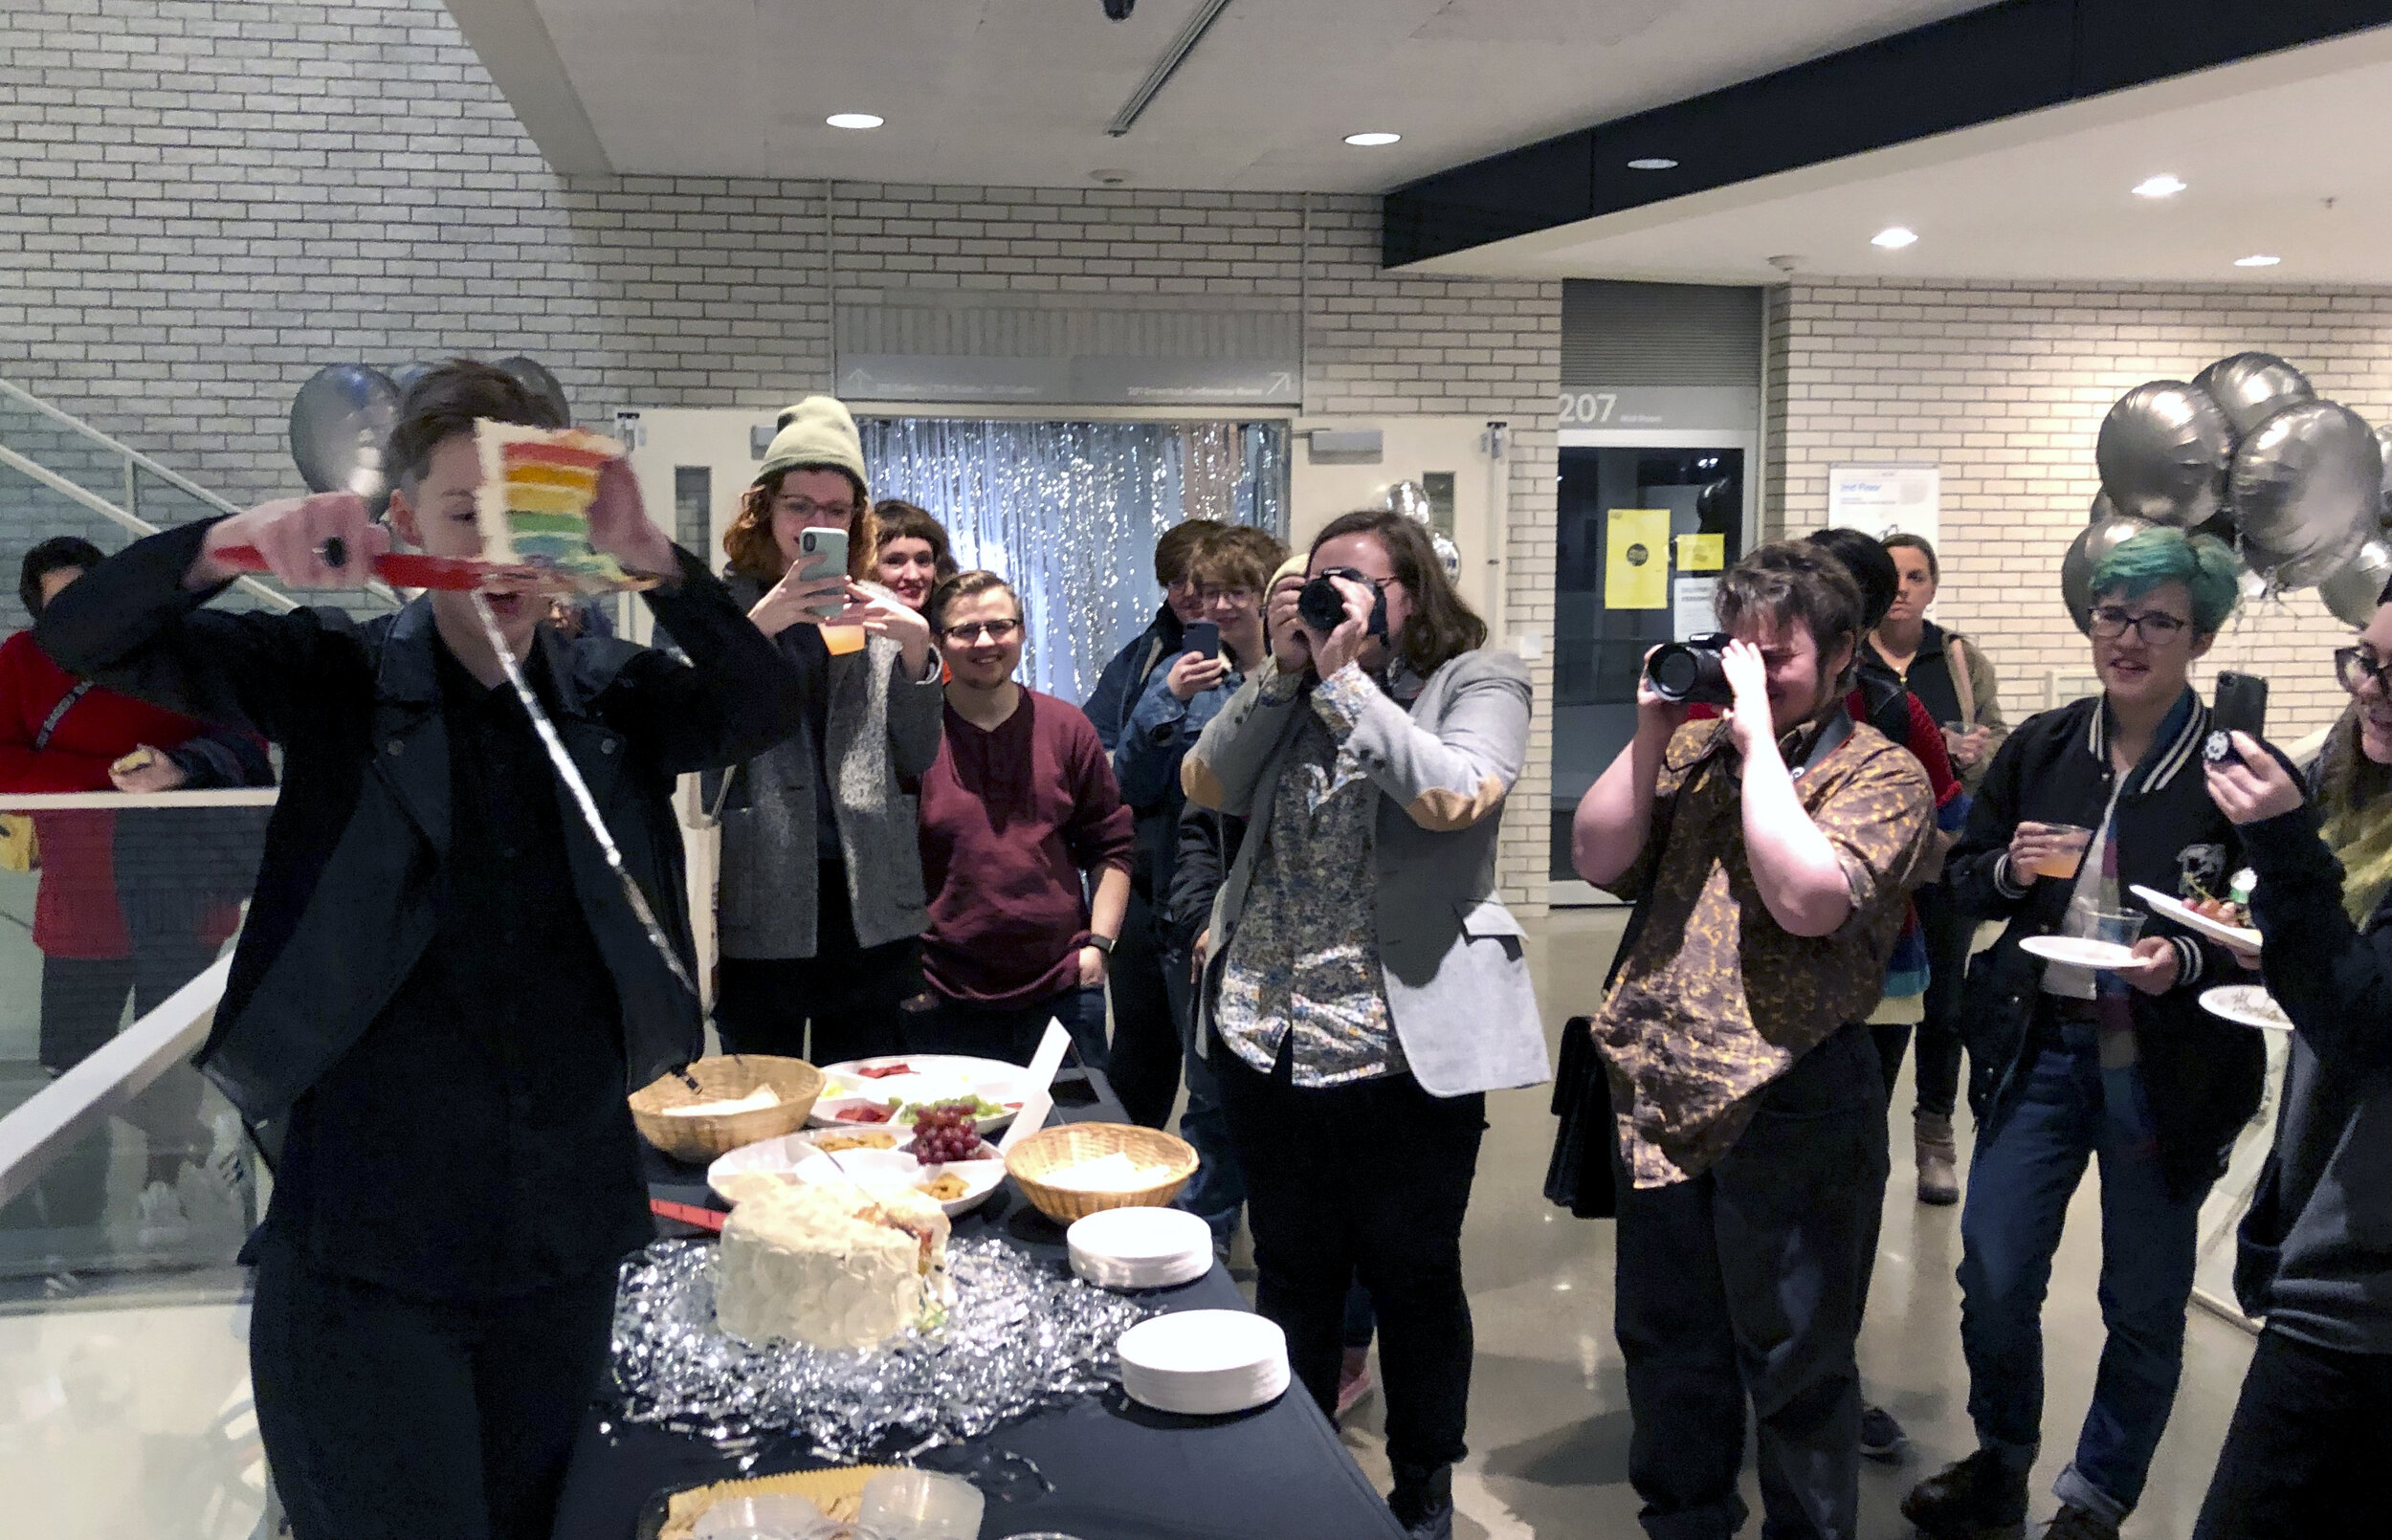 Gender fluid cake cutting at the Minneapolis College of Art and Design